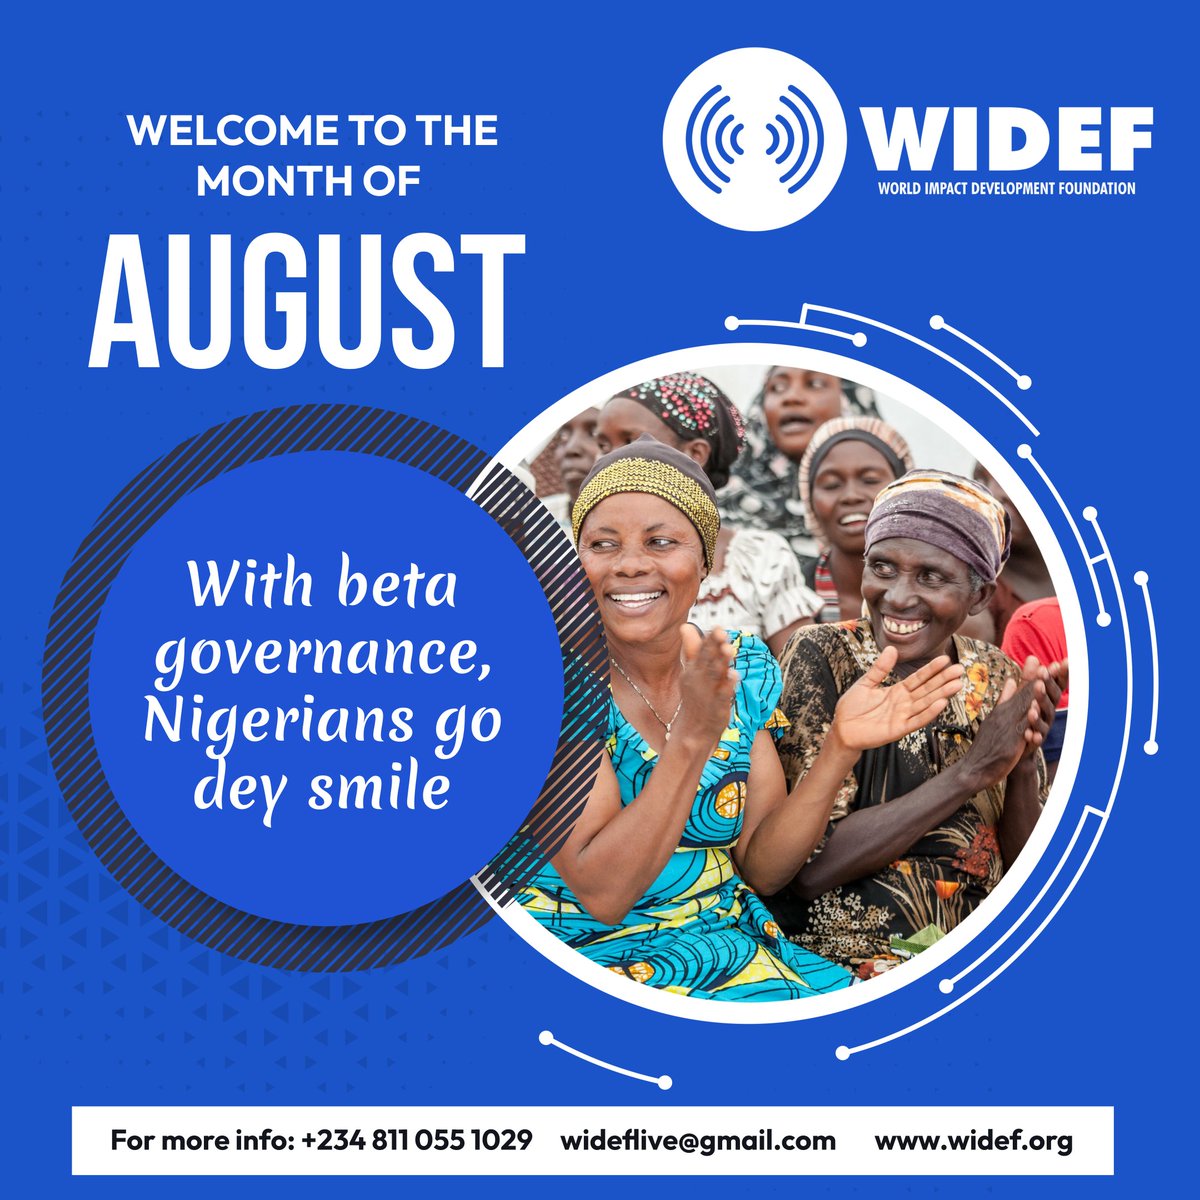 WIDEF welcomes you to the Month of August. 

We believe that all Nigerians are asking for is Good Governance. 

Together, let's all make Nigeria great again! 

Happy New Month! 

#GoodGovernance #PolicyAdvocacy #sustainabledevelopment #SDGs #HappyNewMonth #MonthofAugust